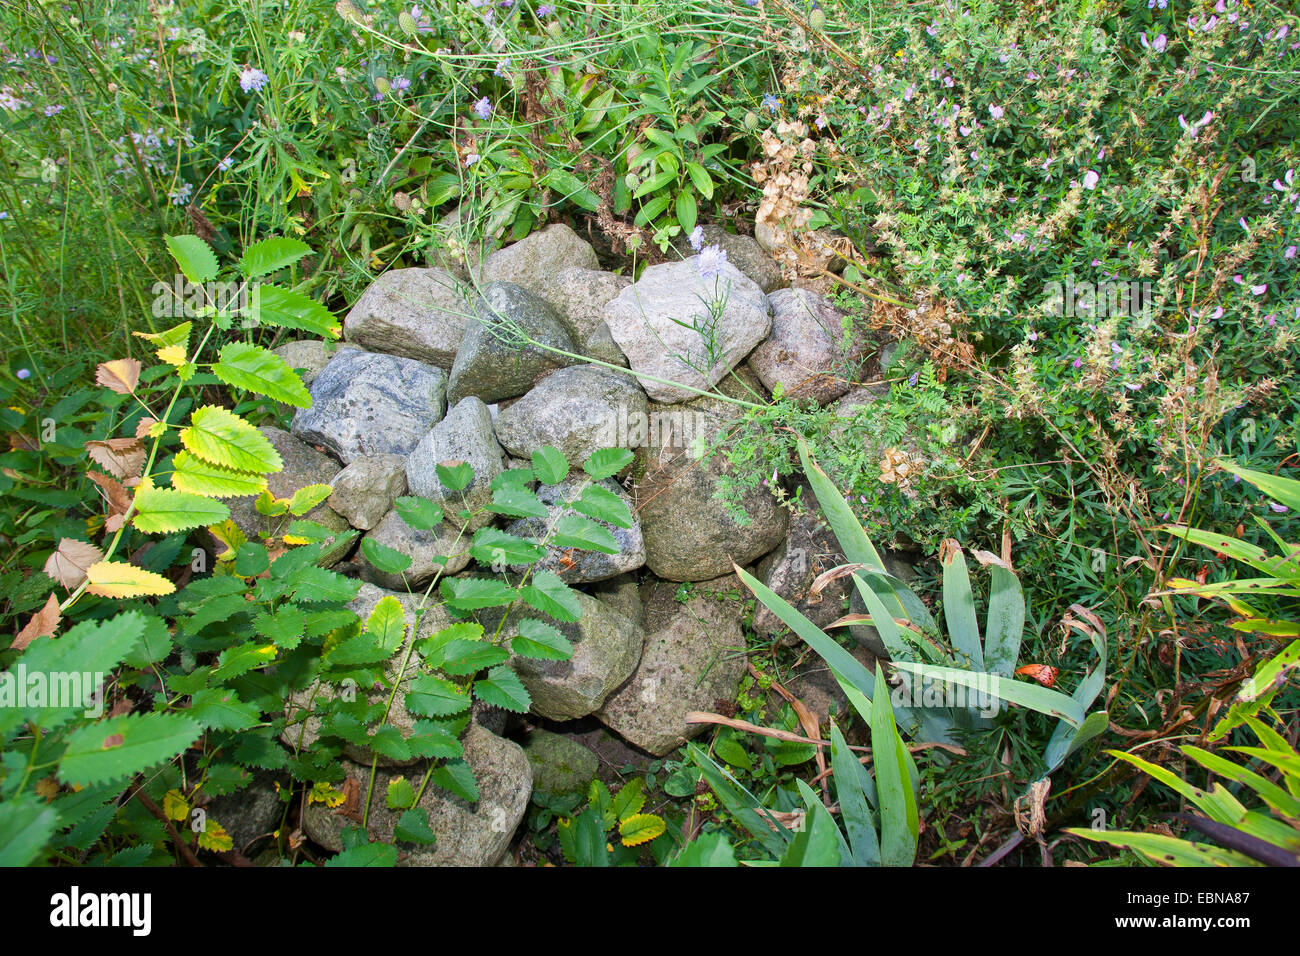 natural stones on a pile of stones, as shelter, habitat for animals in the garden, Germany Stock Photo